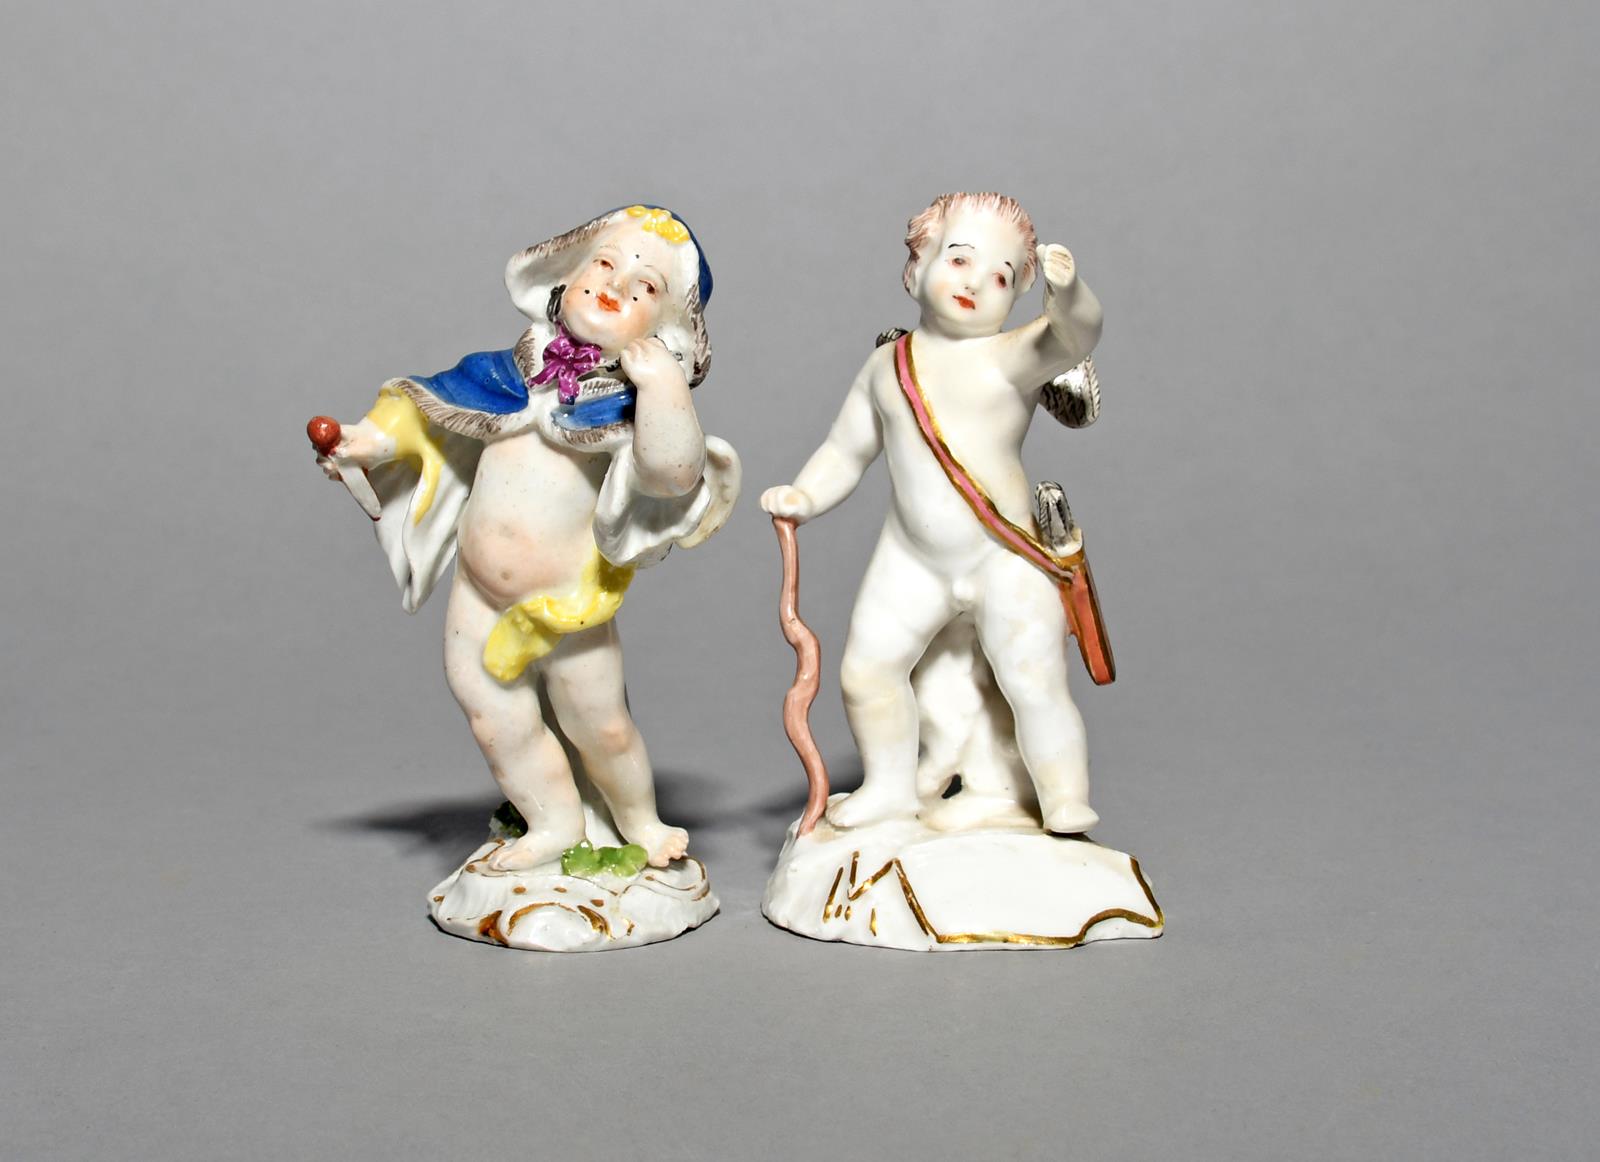 A Meissen figure of Cupid in Disguise, mid 18th century, wearing a fur-lined blue hooded cloak,